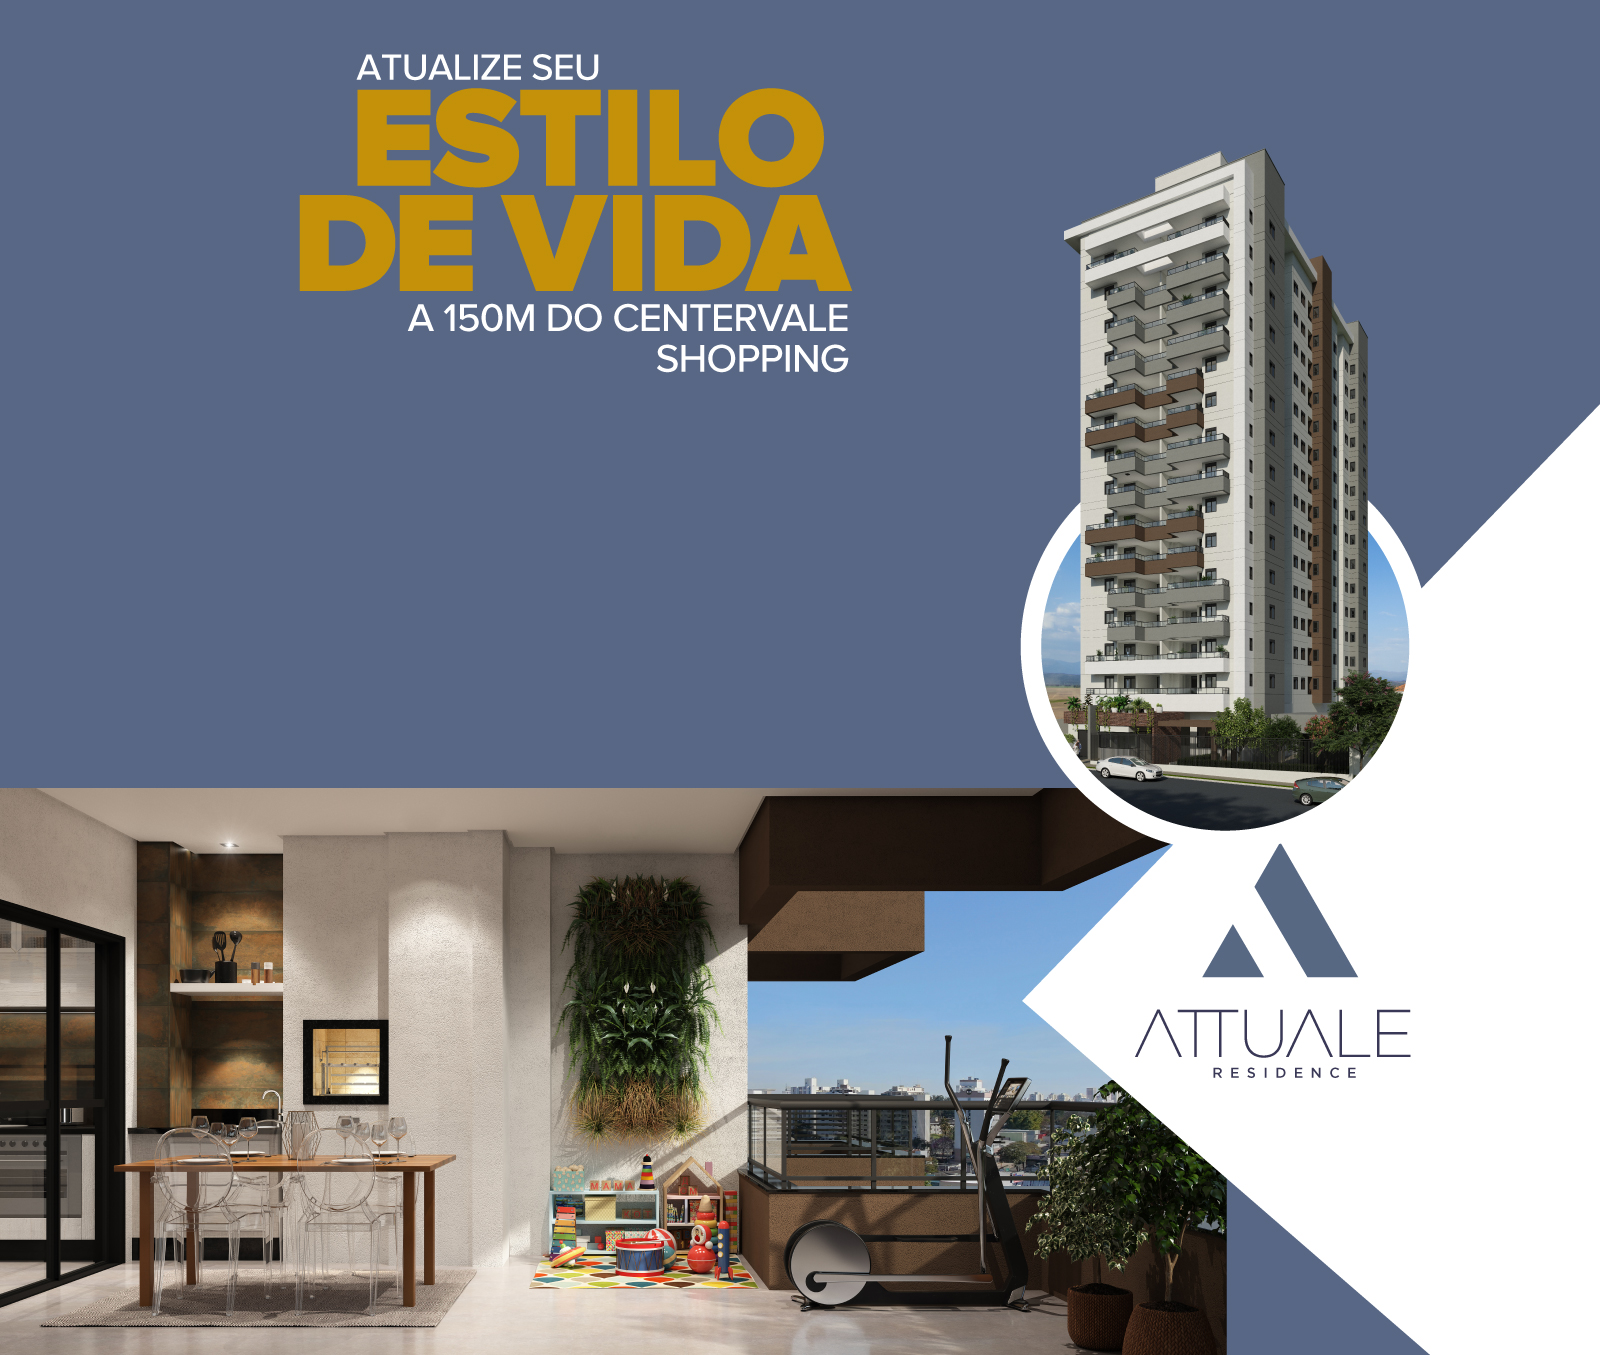 ATTUALE RESIDENCE